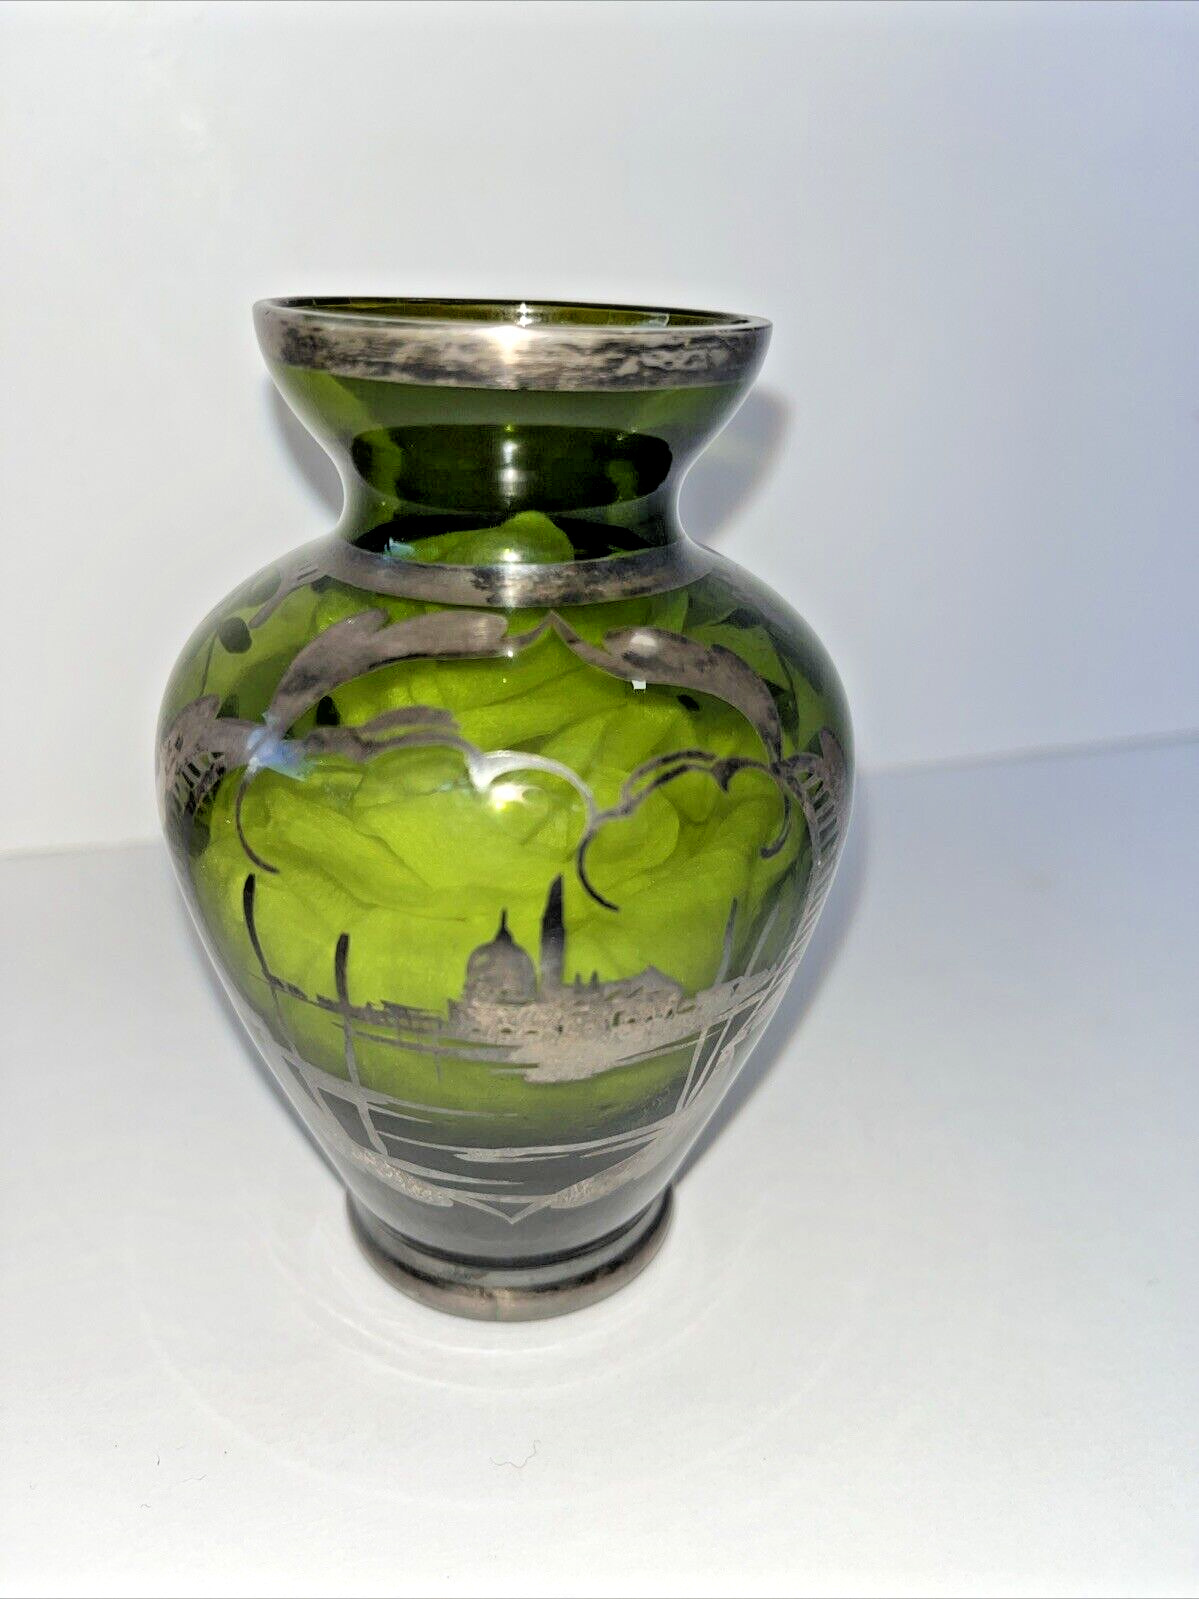 Vintage Italian Glass Vase, Dark Forest Green w/ Patinad Sterling Silver Overlay